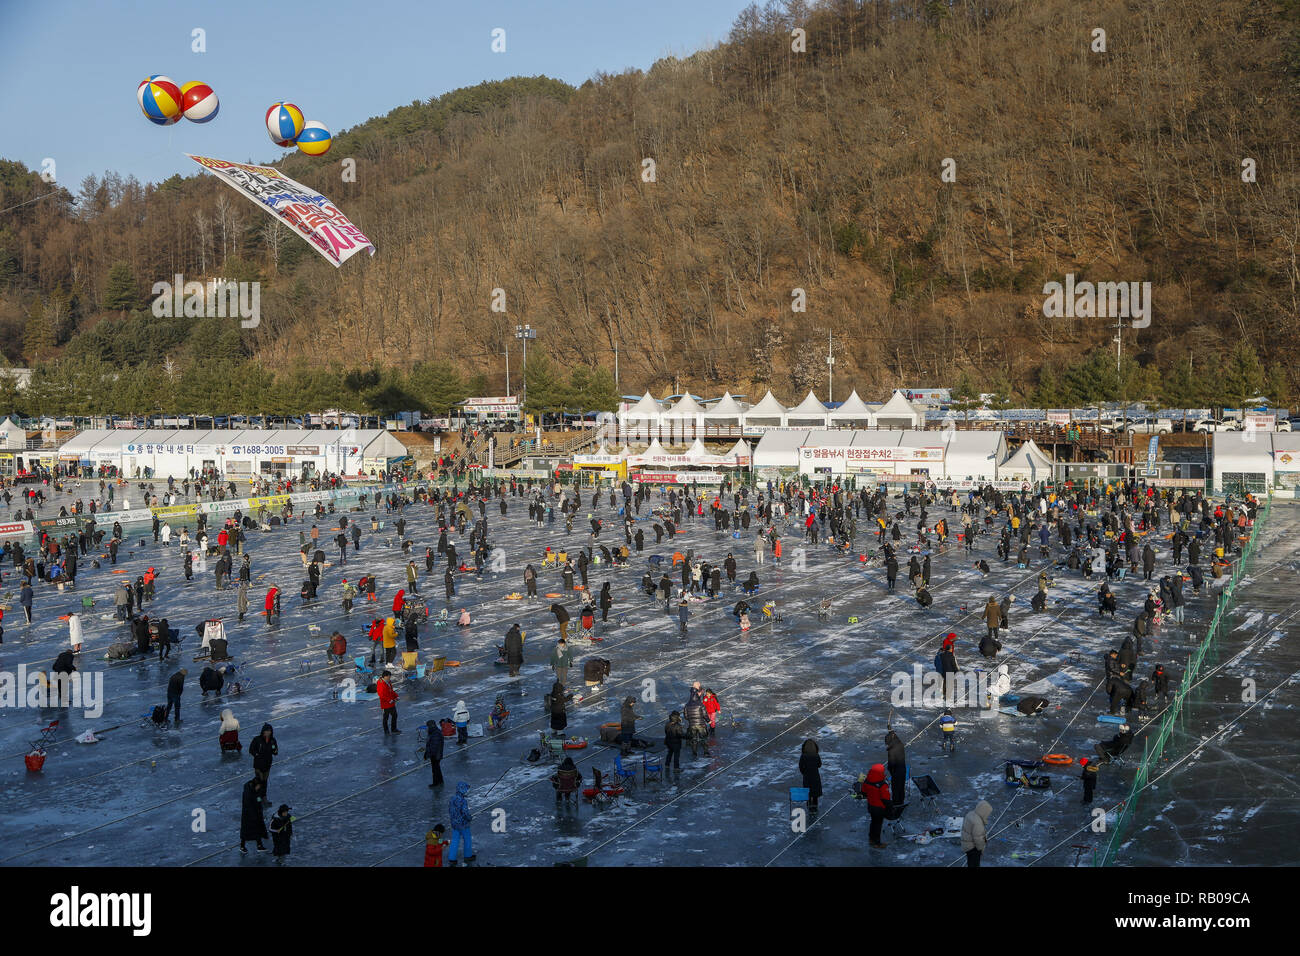 Hwacheon, South Korea. 5th Jan, 2019. January 5, 2019-Hwacheon, South Korea-Visitors cast lines through holes drilled in the surface of a frozen river during a trout catching contest in Hwacheon, South Korea. The contest is part of an annual ice festival which draws over one million visitors every year. Credit: Ryu Seung-Il/ZUMA Wire/Alamy Live News Stock Photo